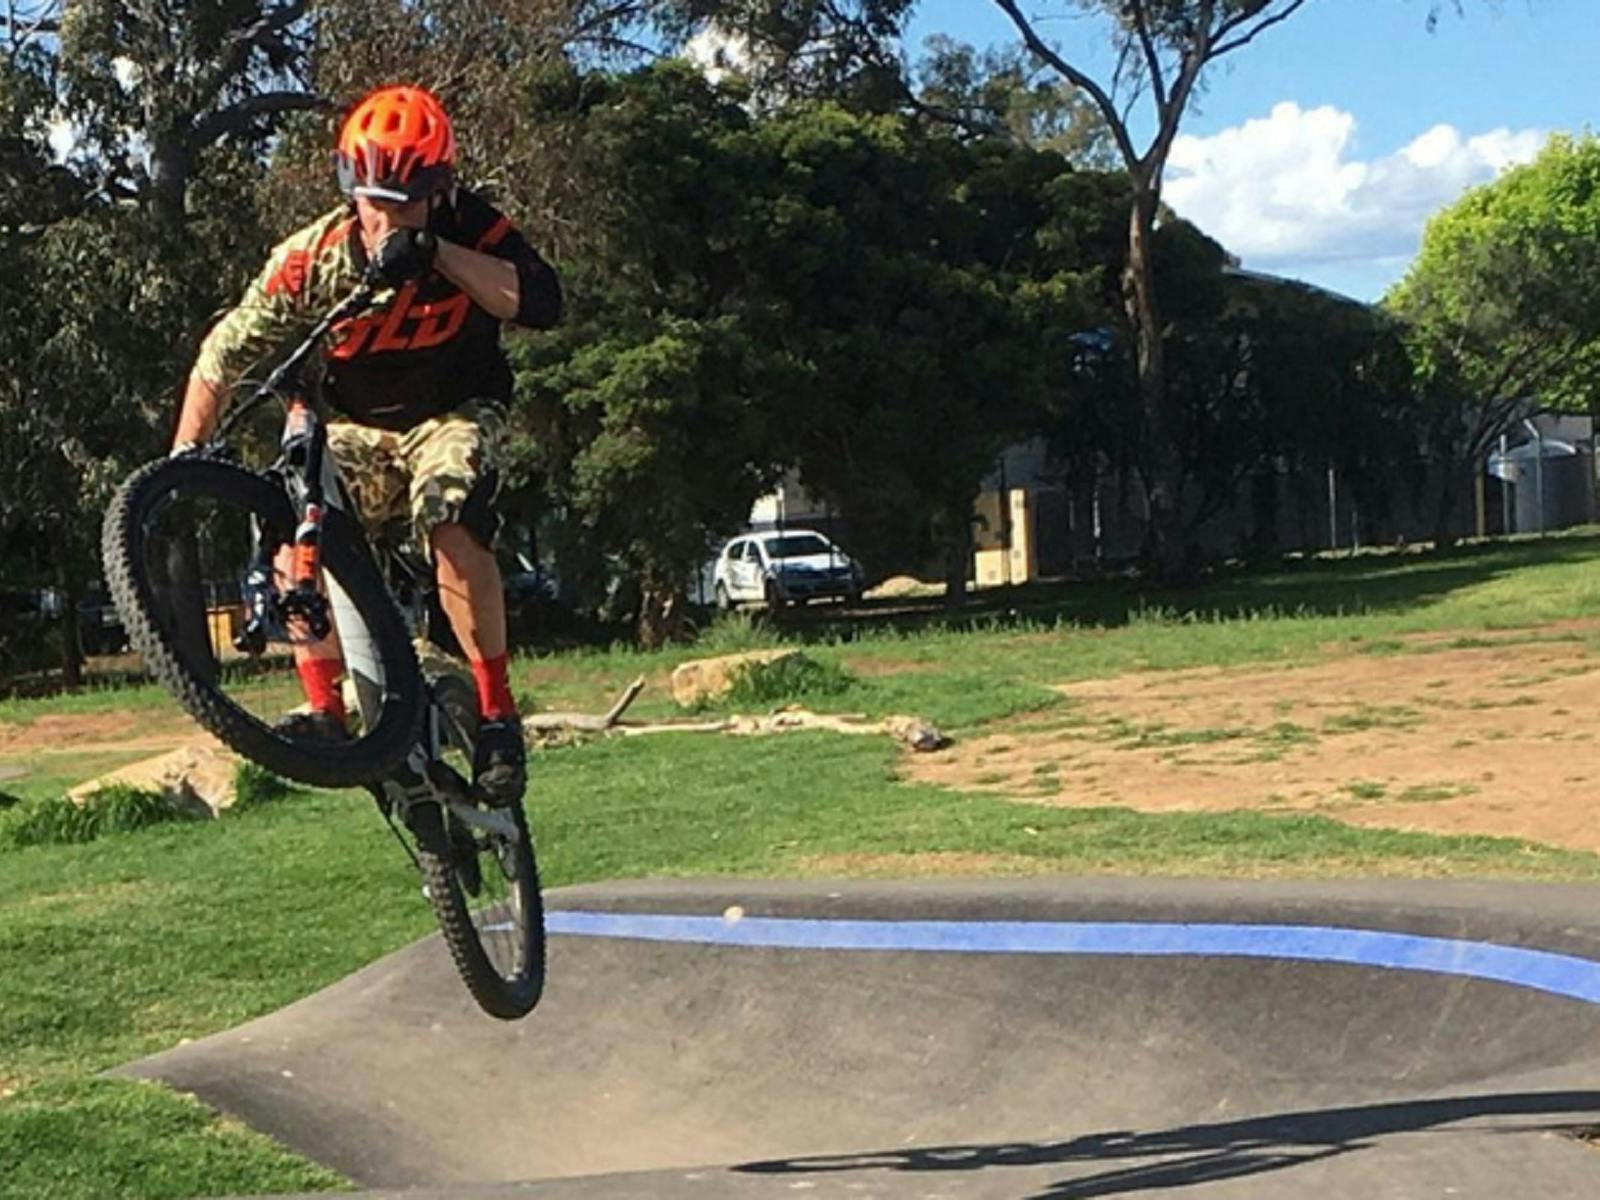 Wangaratta pump track suitable for BMX and scooter riders.